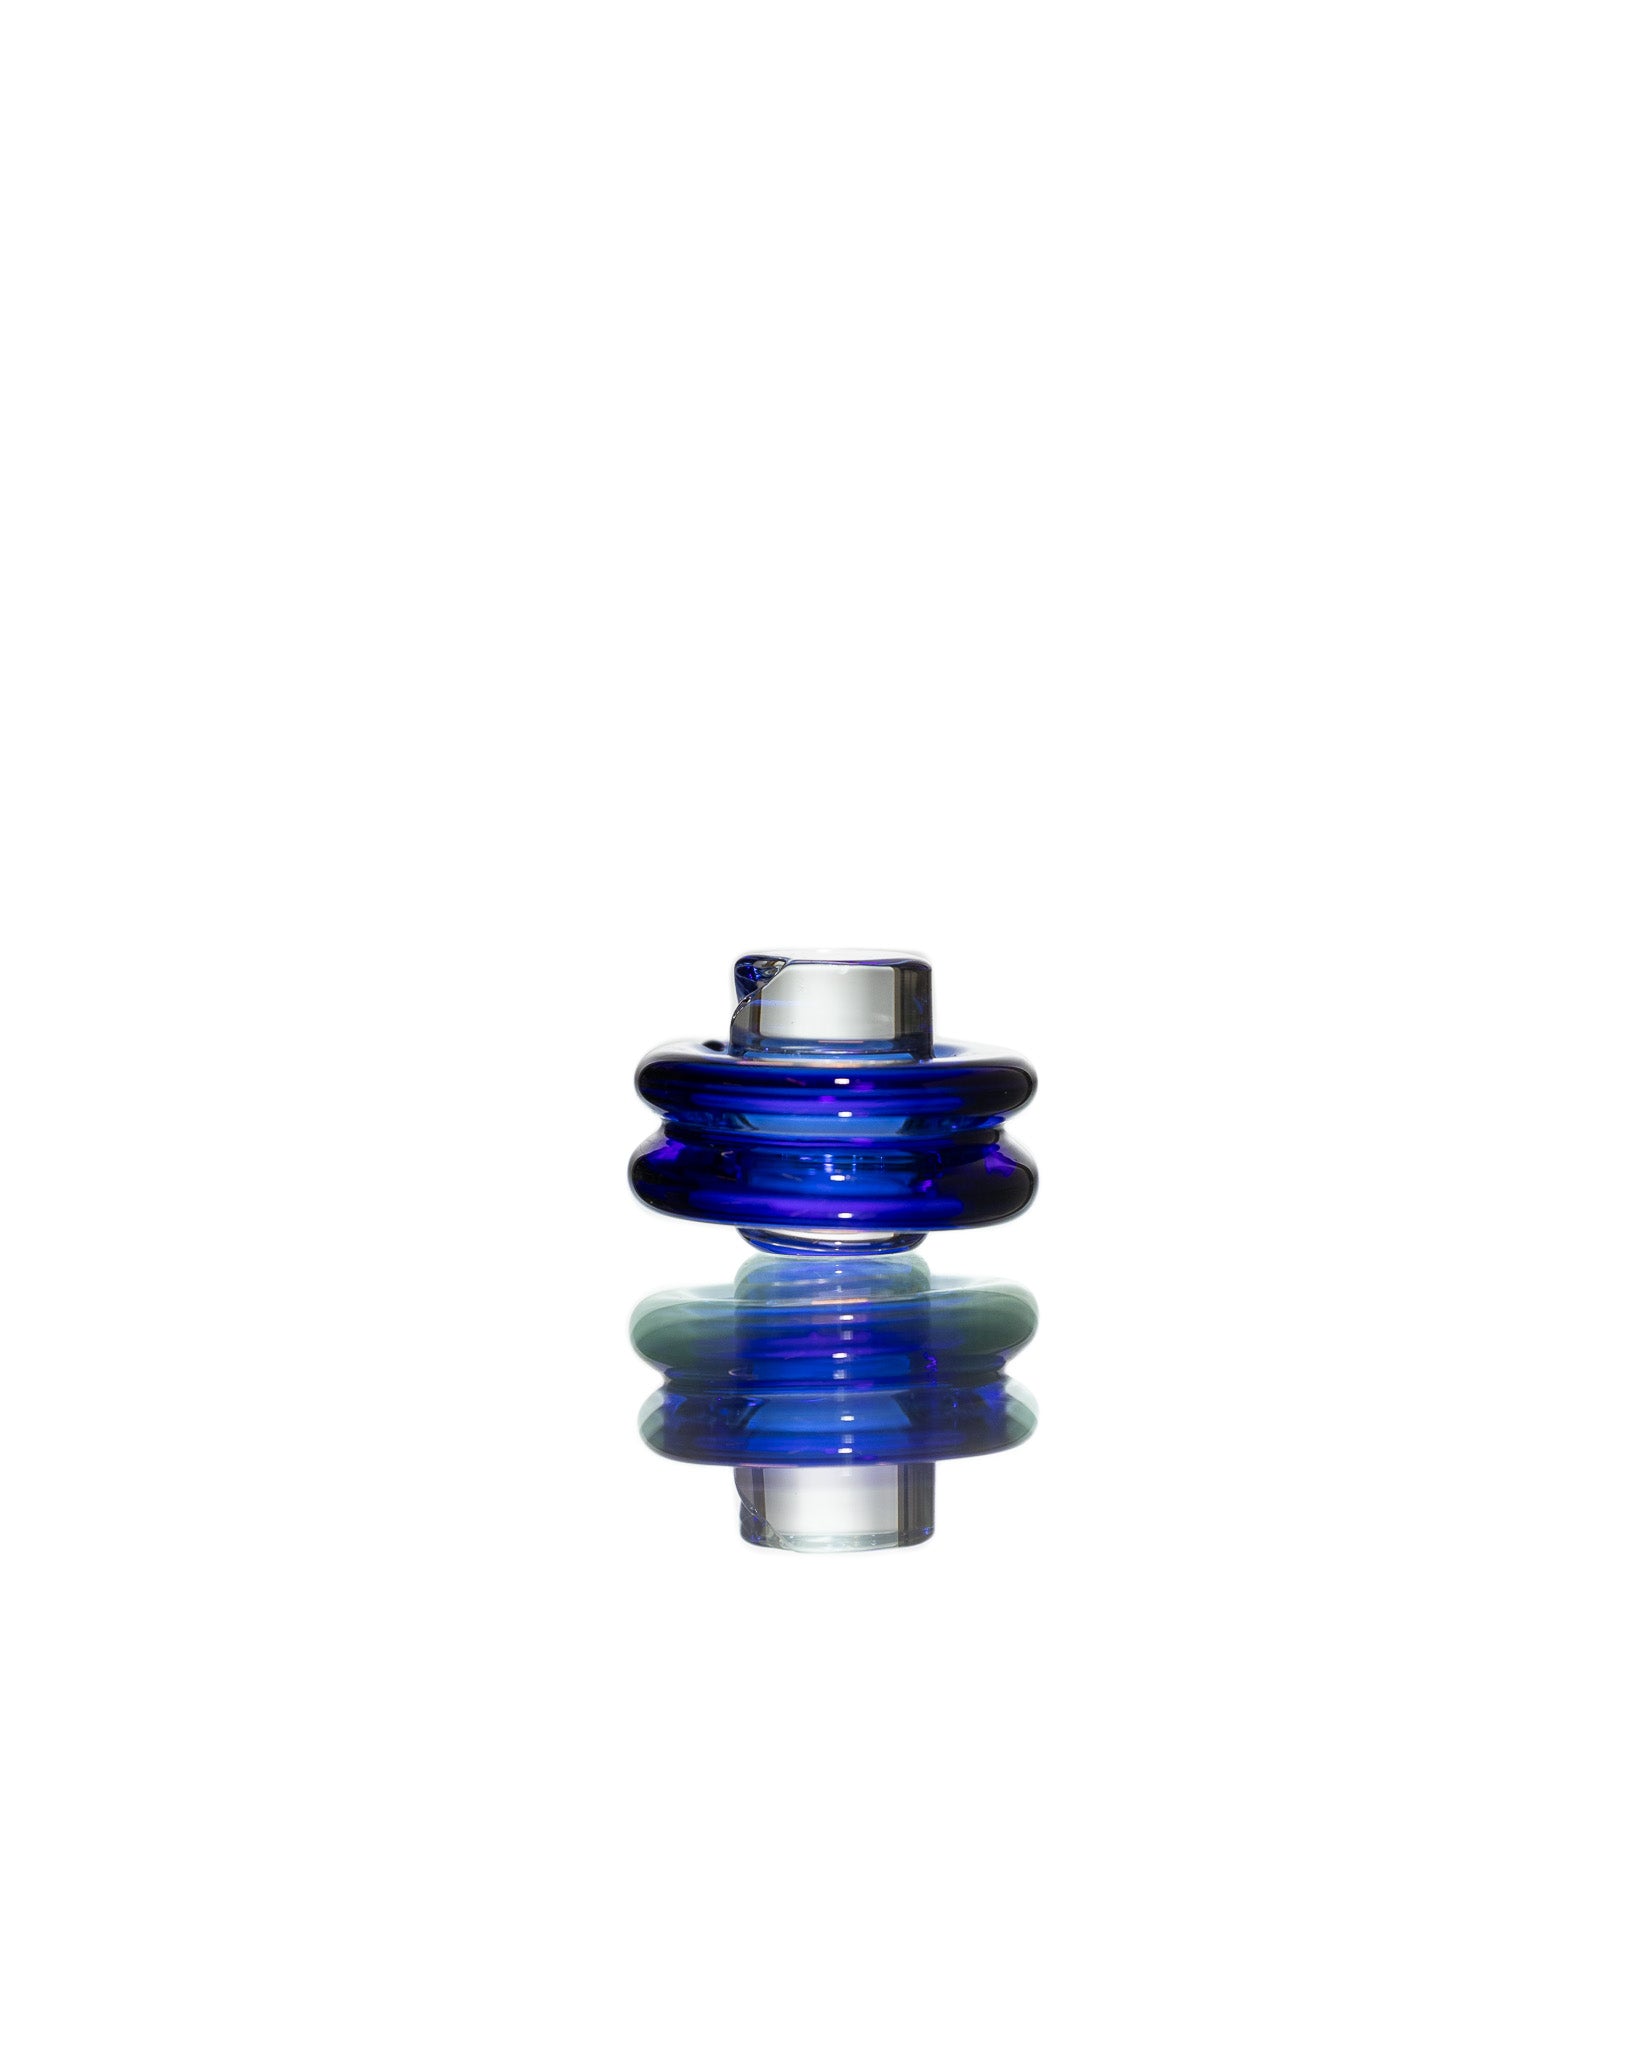 One Trick Pony - "Brilliant Blue" Flat Top "Rockulus" Spinner Cap